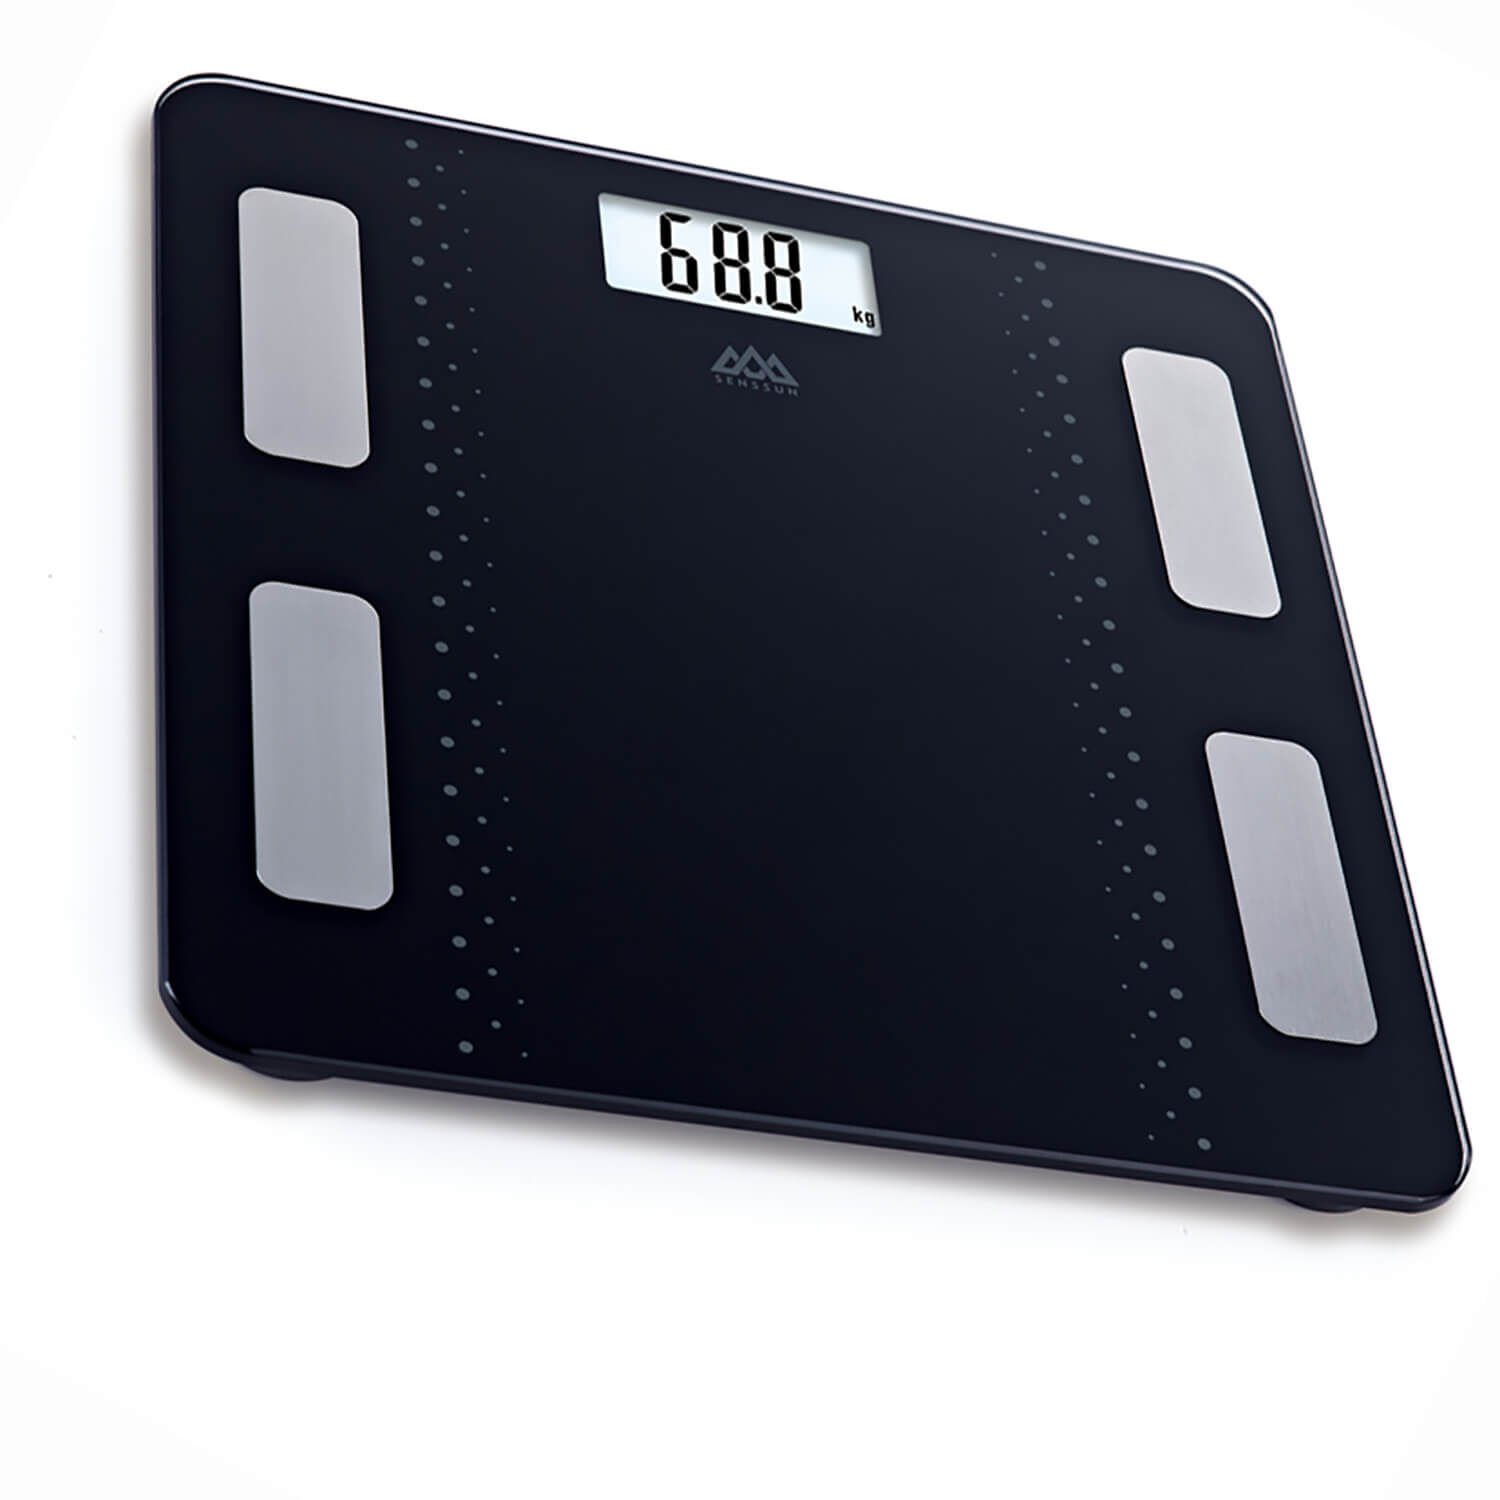 Camry Body Analyser Bluetooth Scale